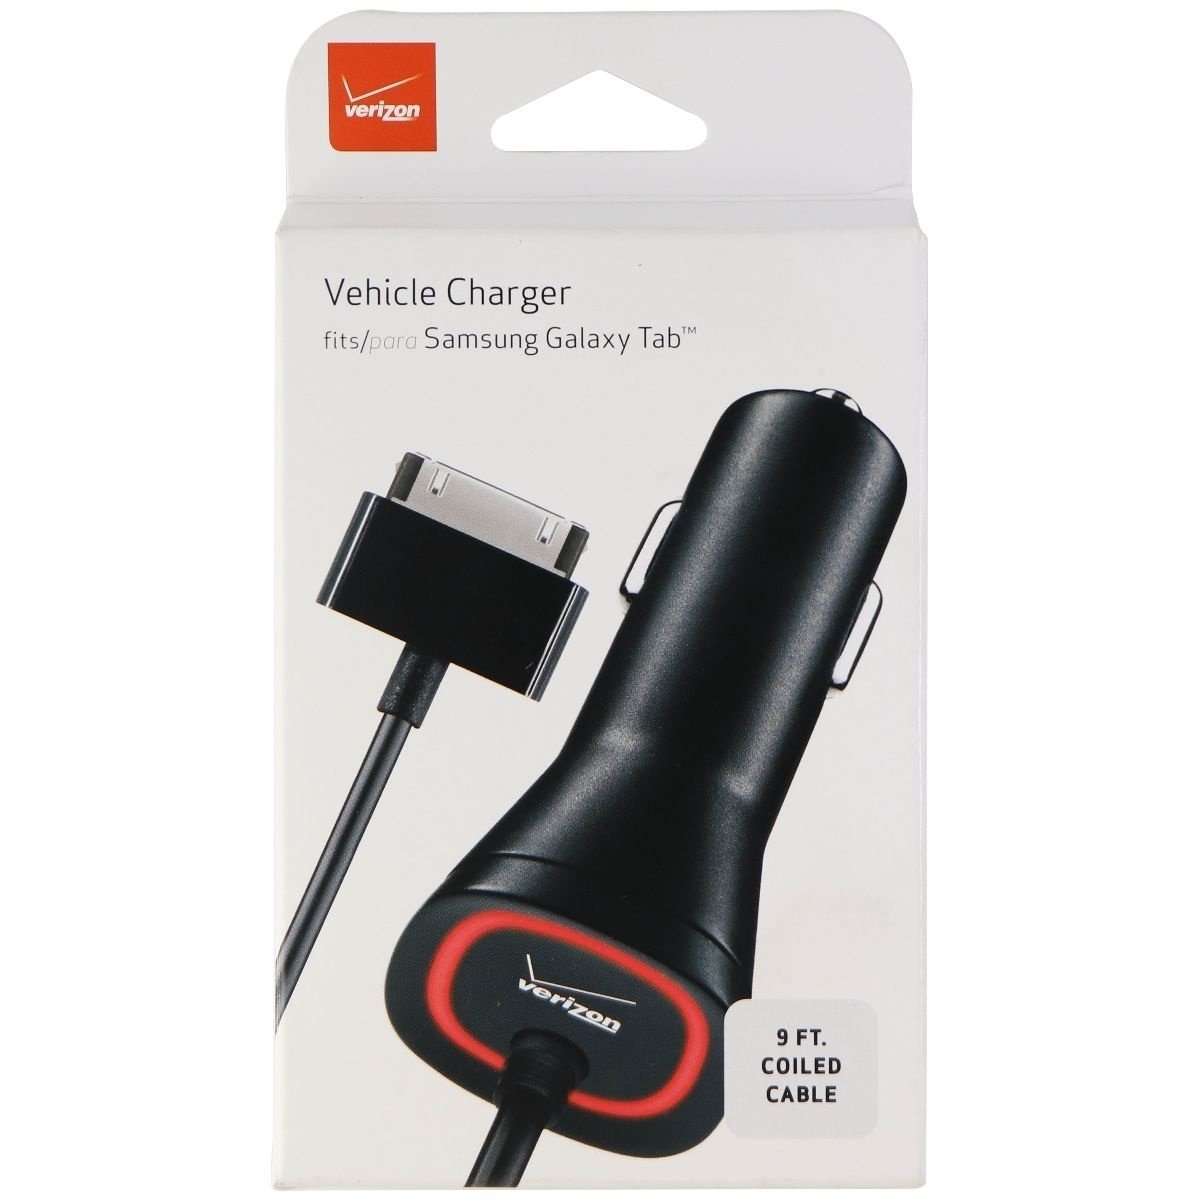 Verizon 9-Ft Coiled Cable Vehicle Charger For Samsung Galaxy Tab 30-Pin - Black